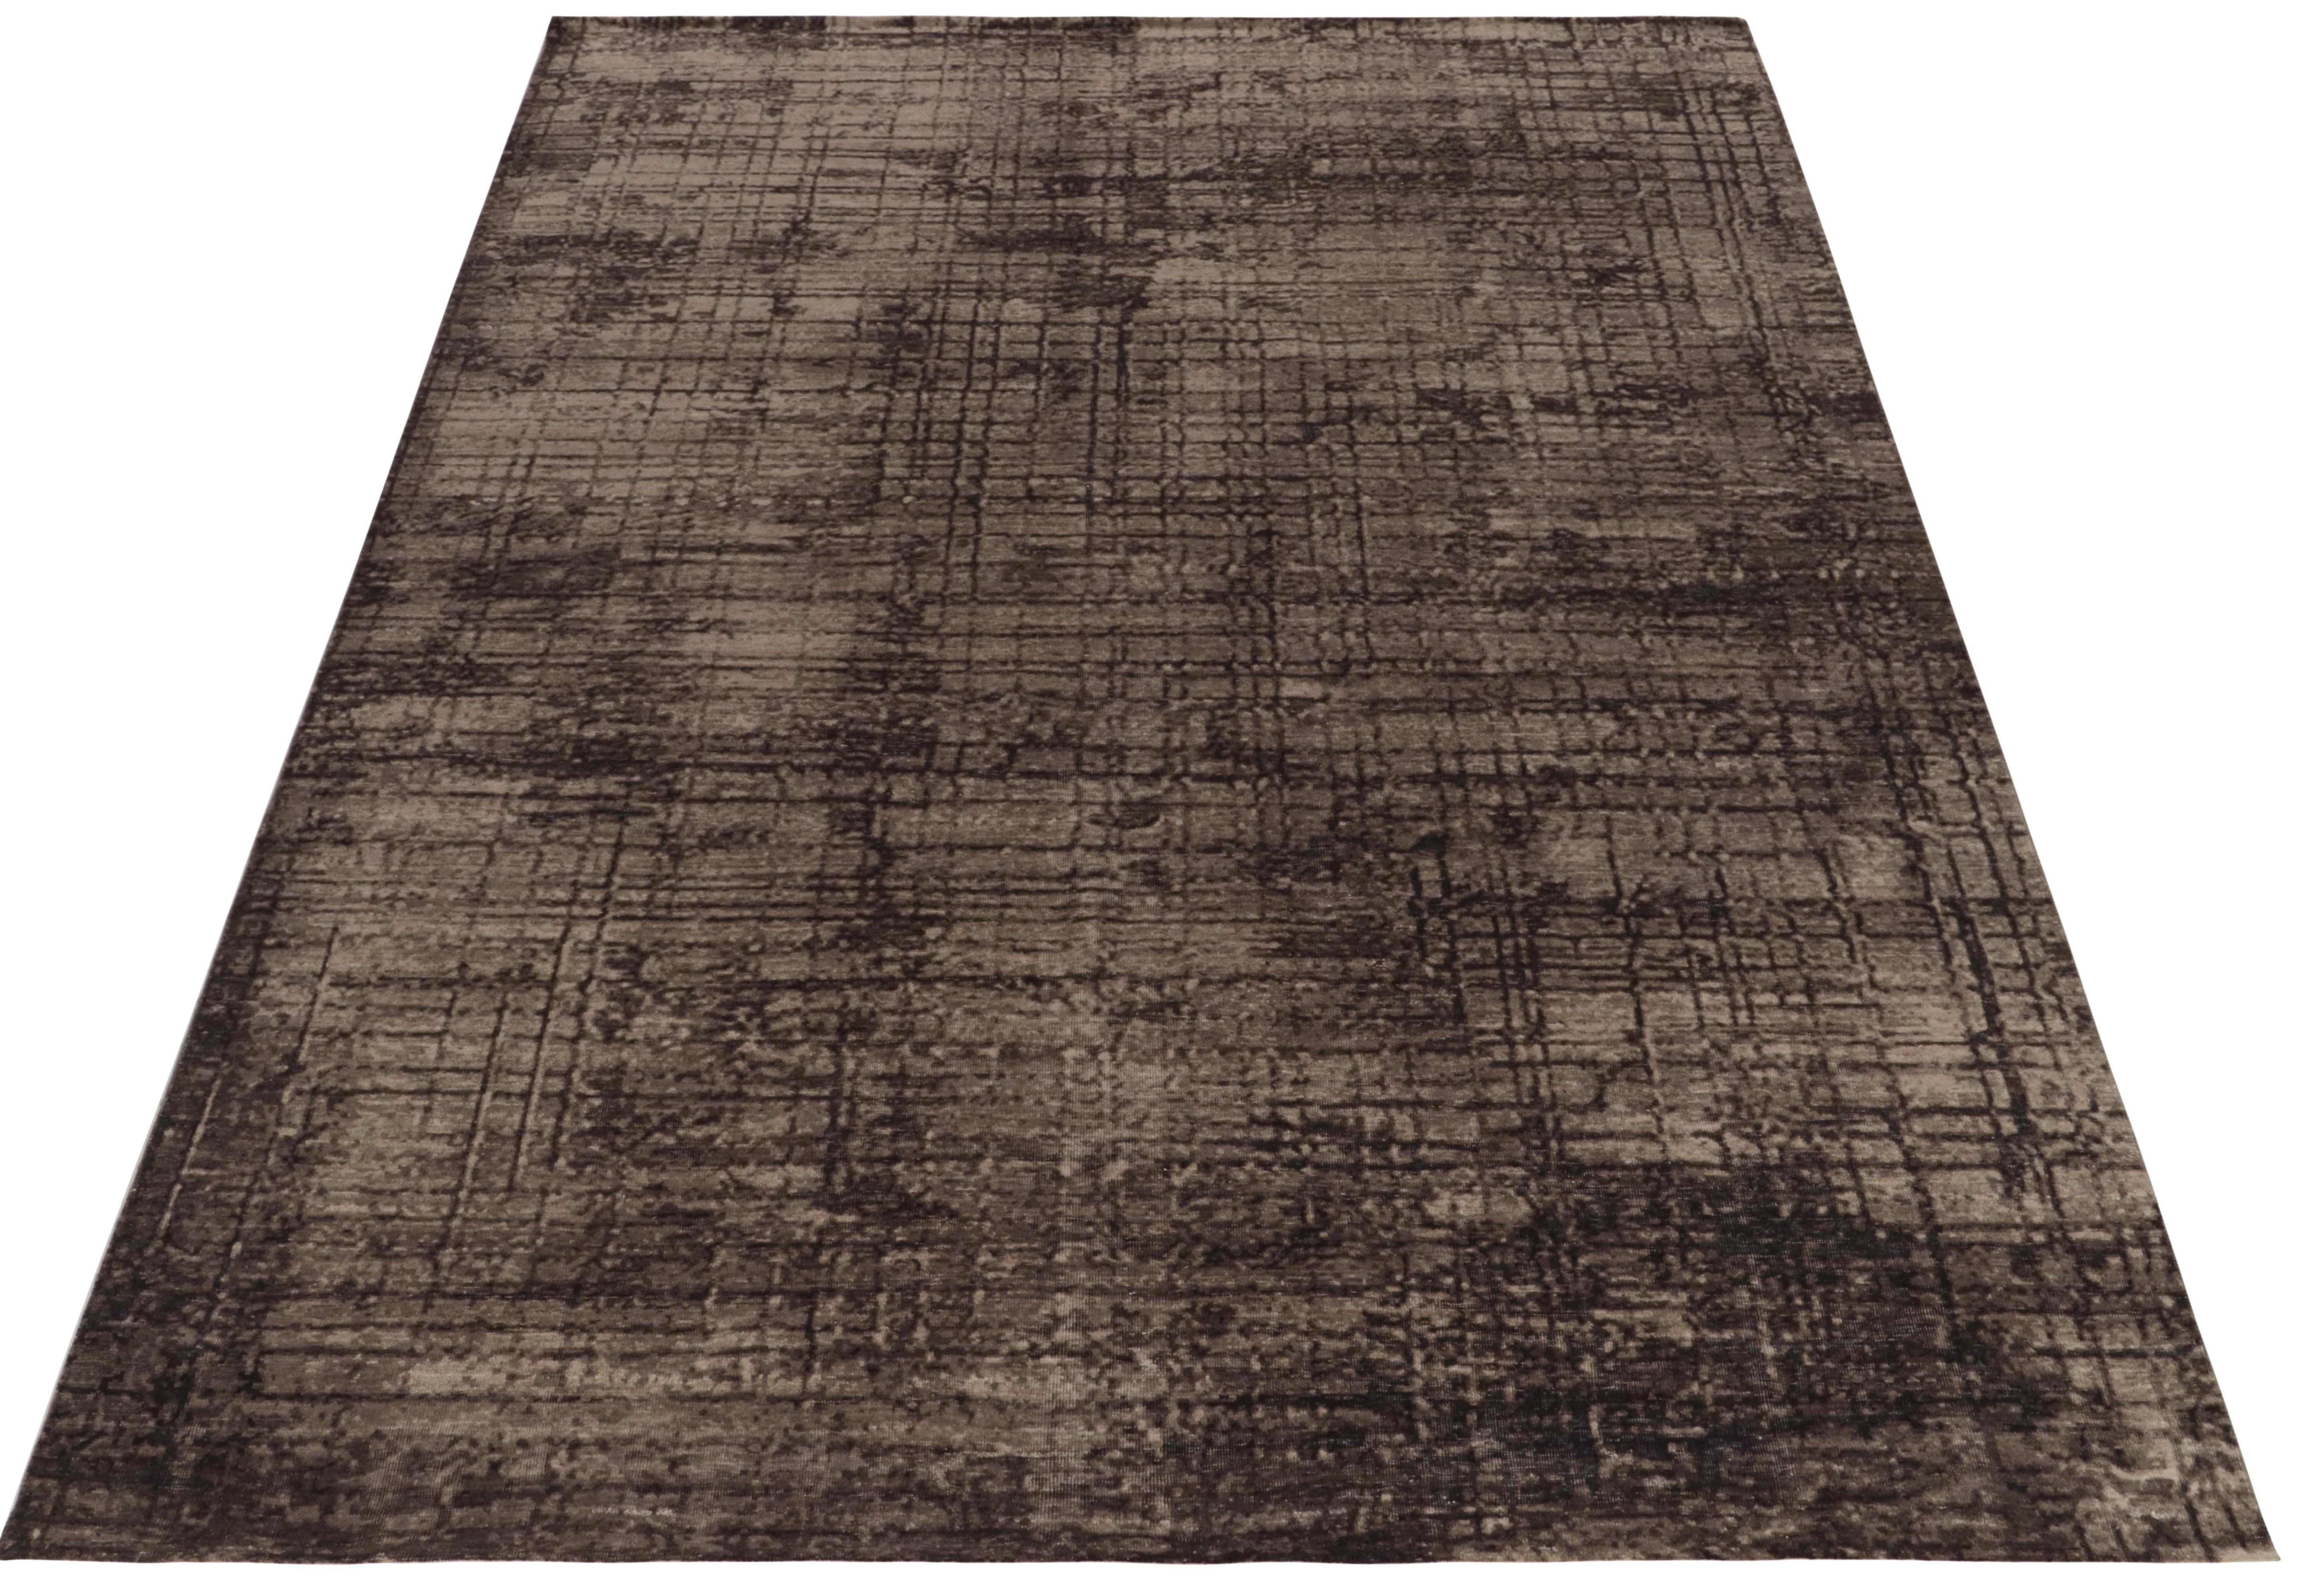 Hand-knotted in all wool, an 8x10 piece Rug & Kilim’s bold new contemporary selections. Relishing abstract sensibilities, the rug features a painterly geometric patterns with pollock-esque streaks of beige-brown and black tones. All together